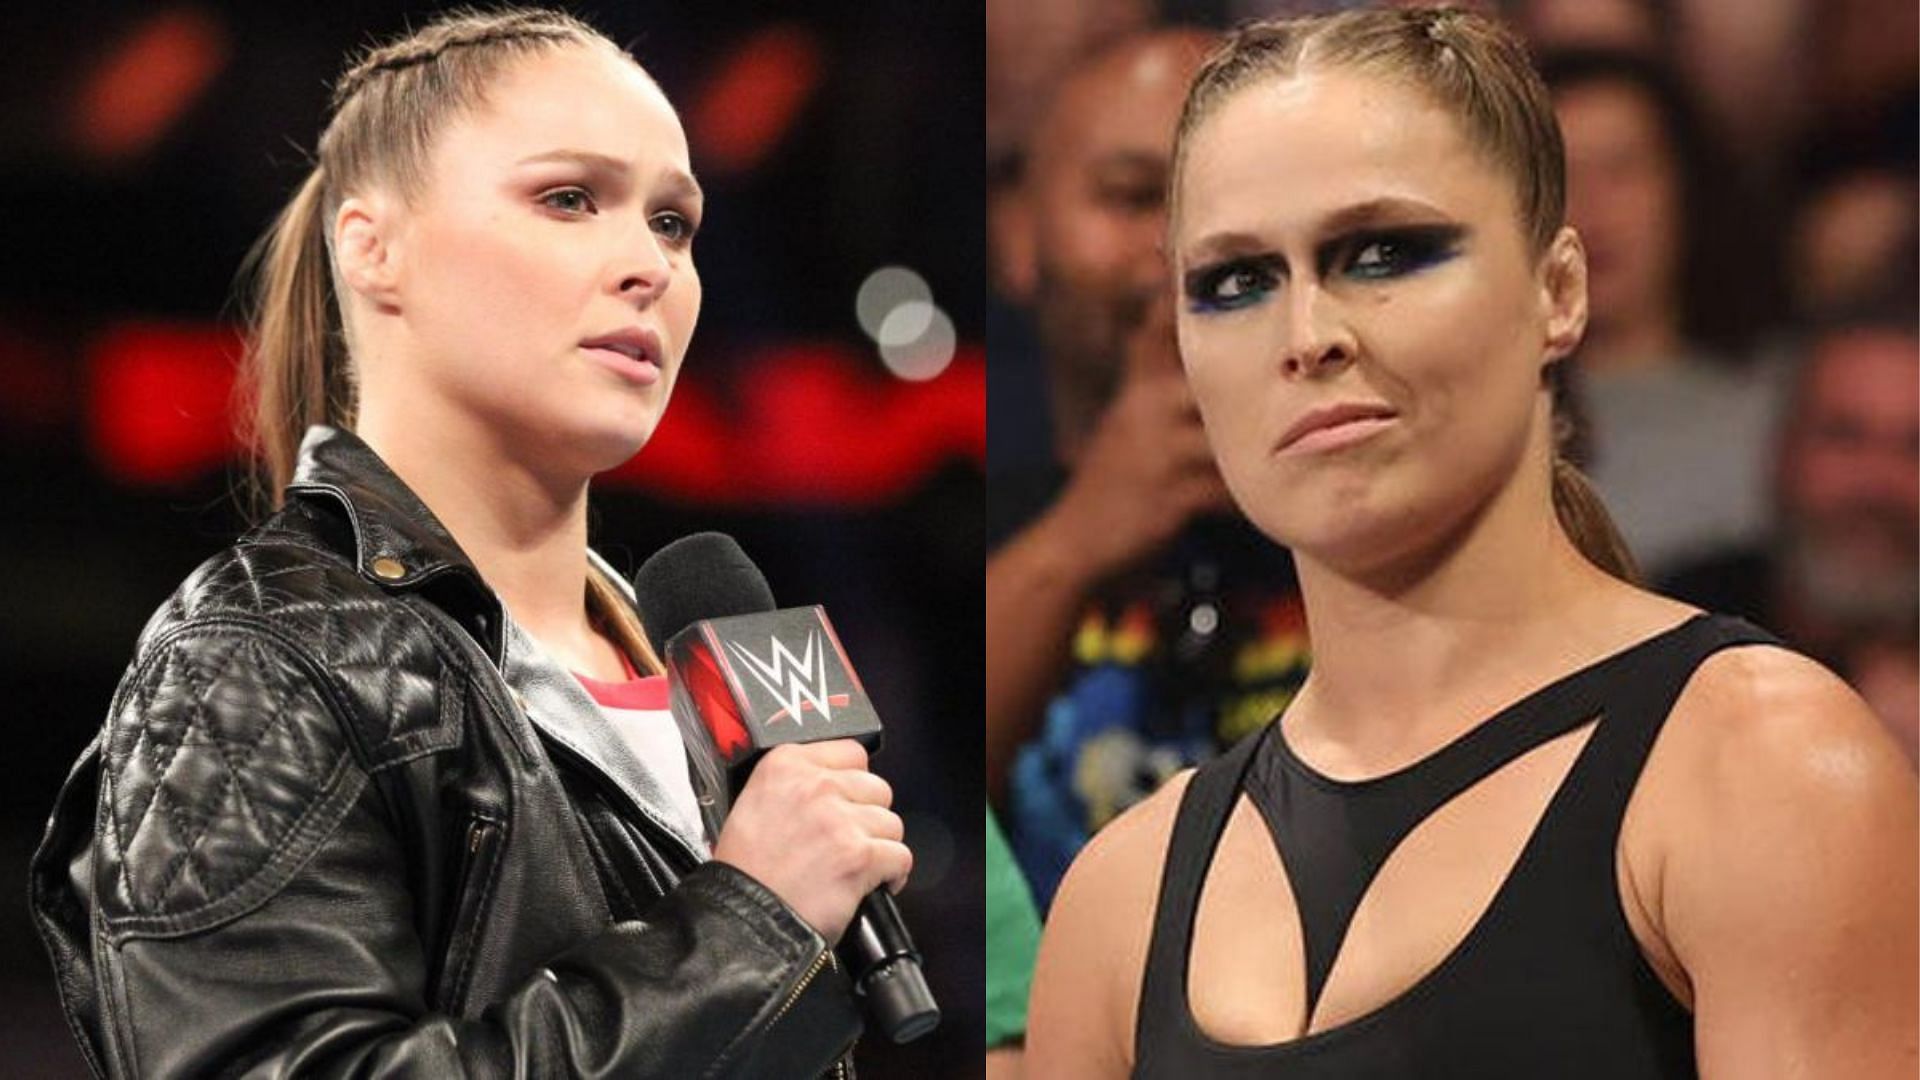 Ronda Rousey has had an excellent WWE career